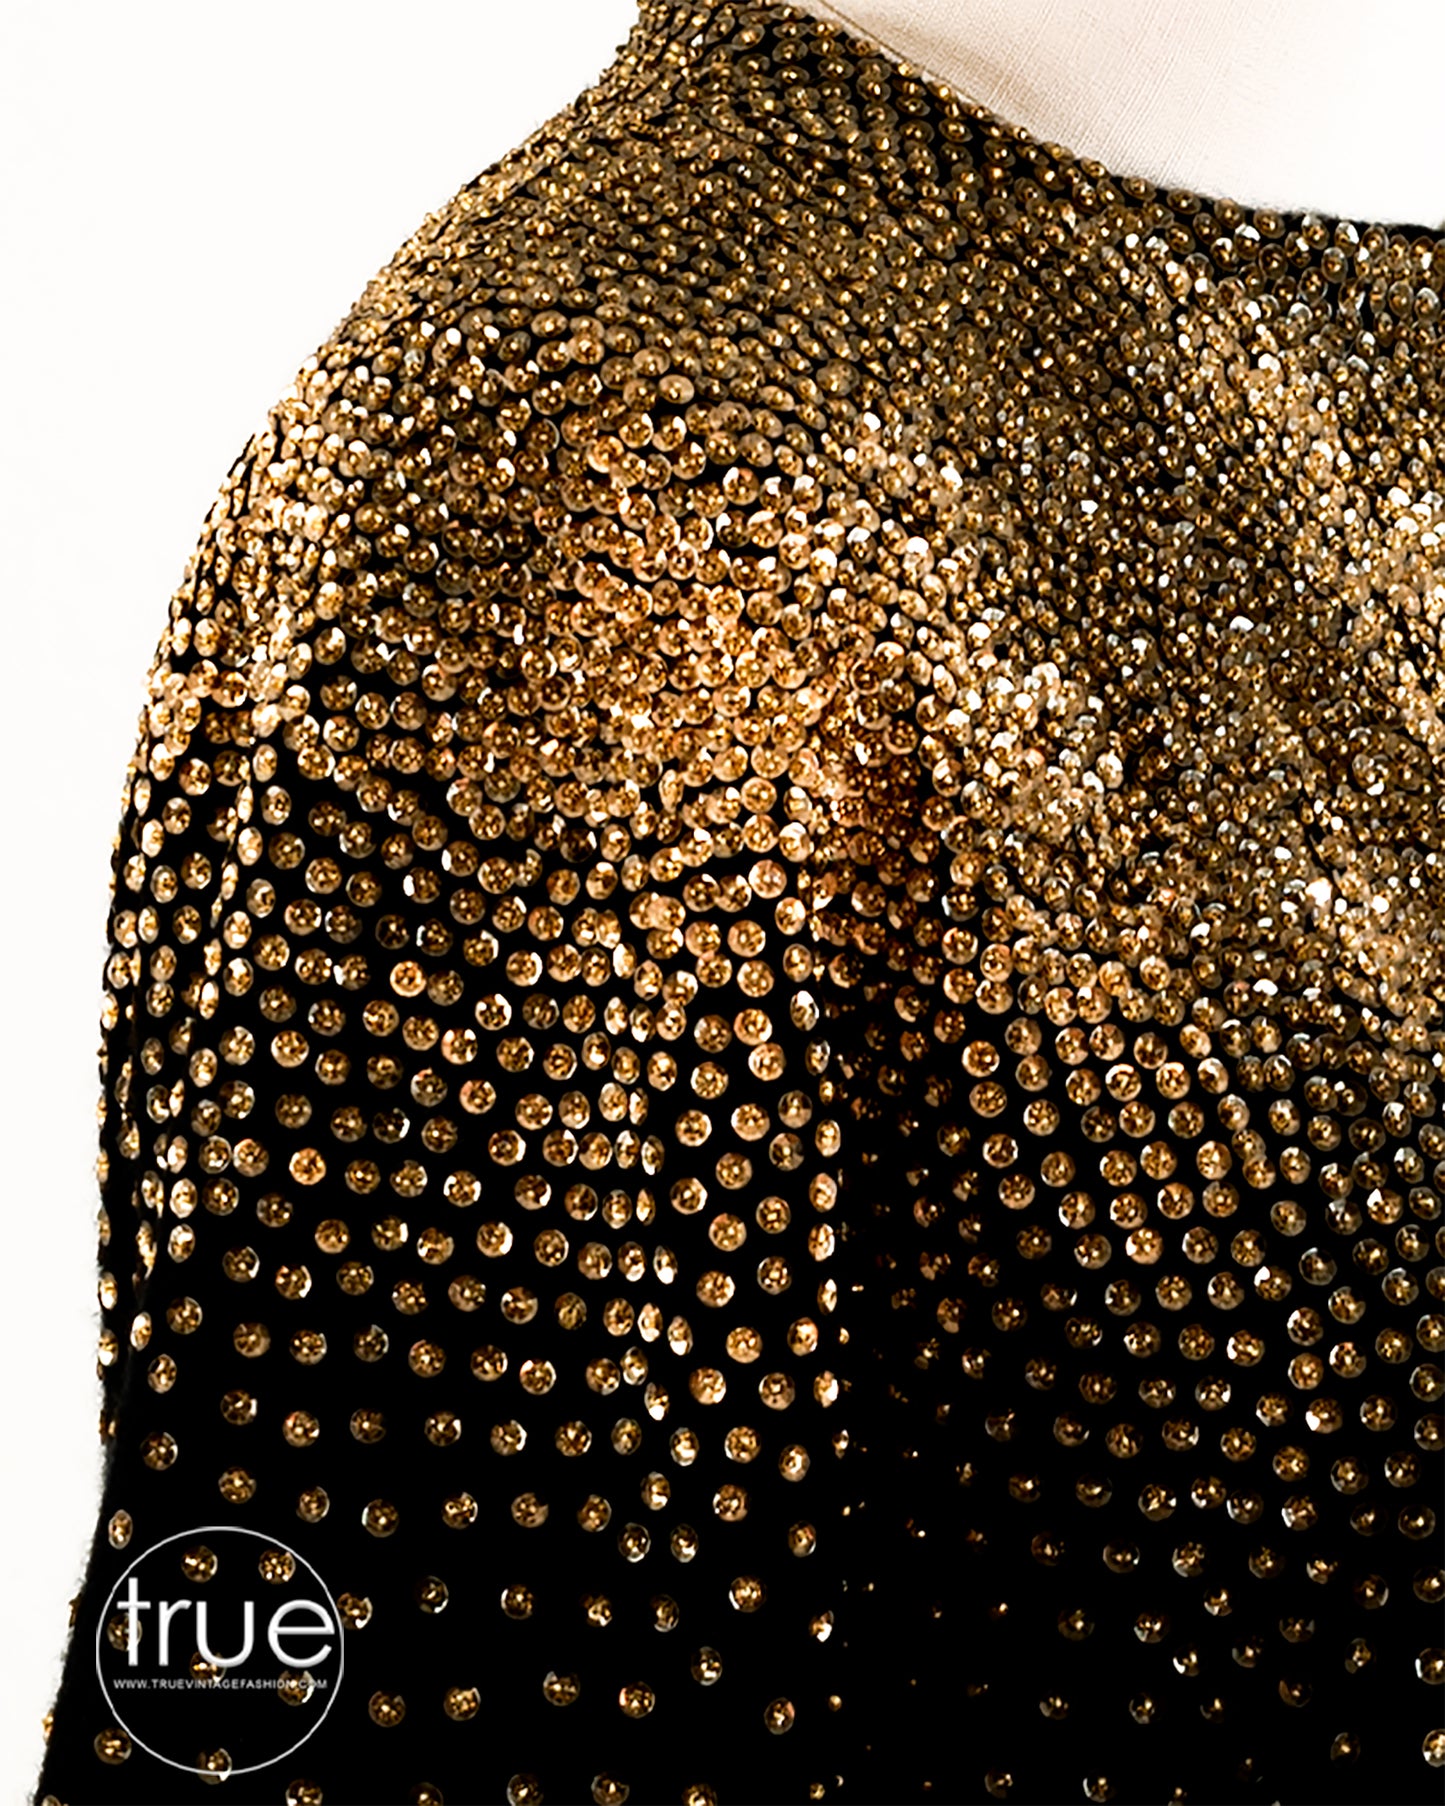 vintage 1950's sweater ...classic MILADY black cardigan dripping in GOLD sequins